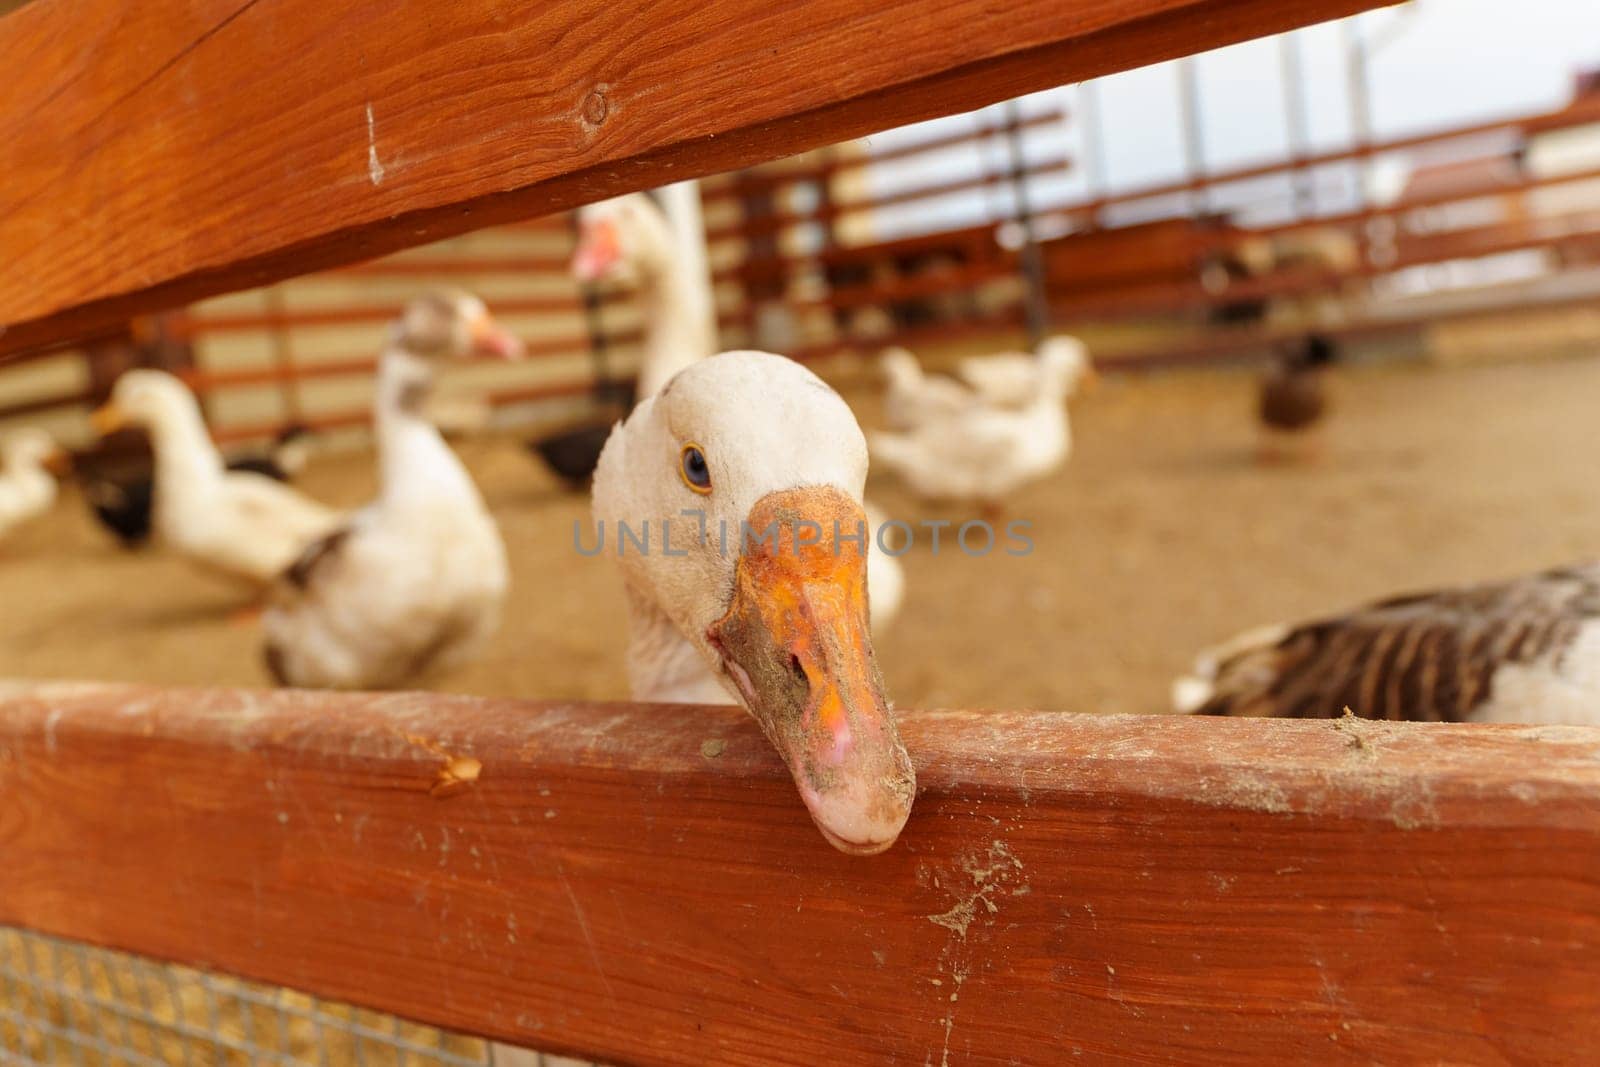 Goose with a speckled head and an orange beak peeks inquisitively through the slats of a wooden fence on a cloudy day at a farm. by darksoul72